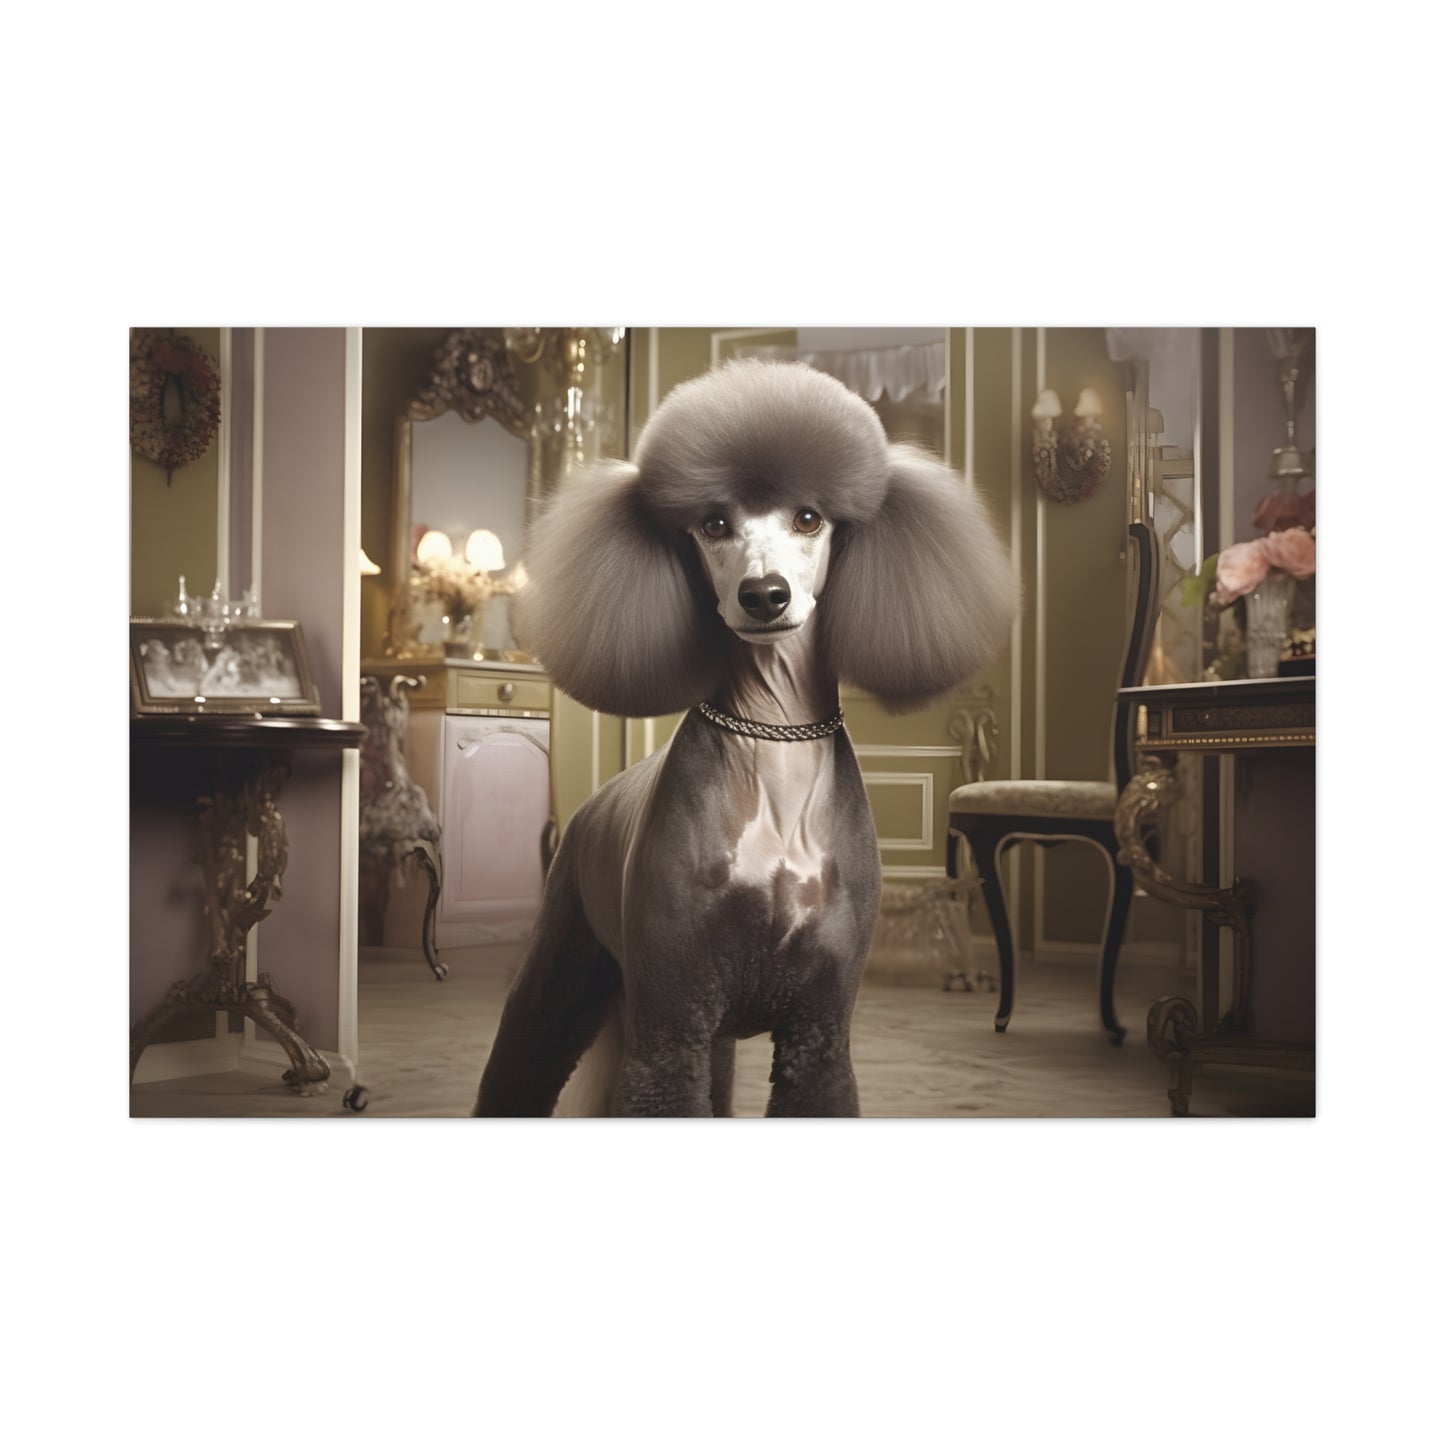 Poodle In The Palace